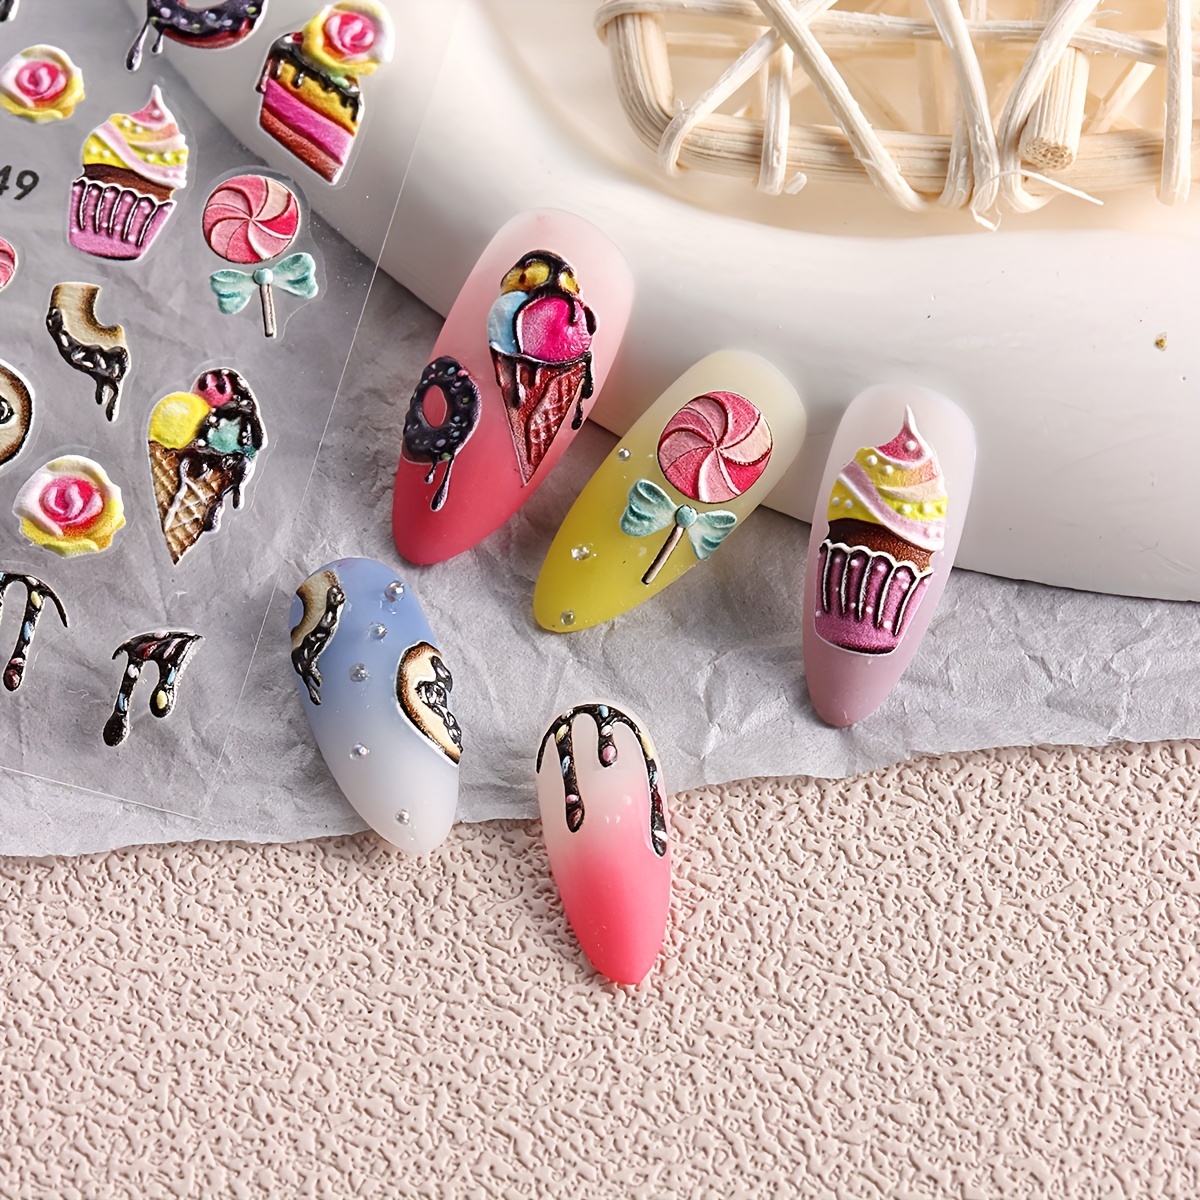 8pcs Mouse Nail Stickers Decals, 3D Self Adhesive Mouse Love Xoxo Heart Cute Cartoon Nail Art Stickers DIY Nail Stickers Mother’s Day Gifts Birthday